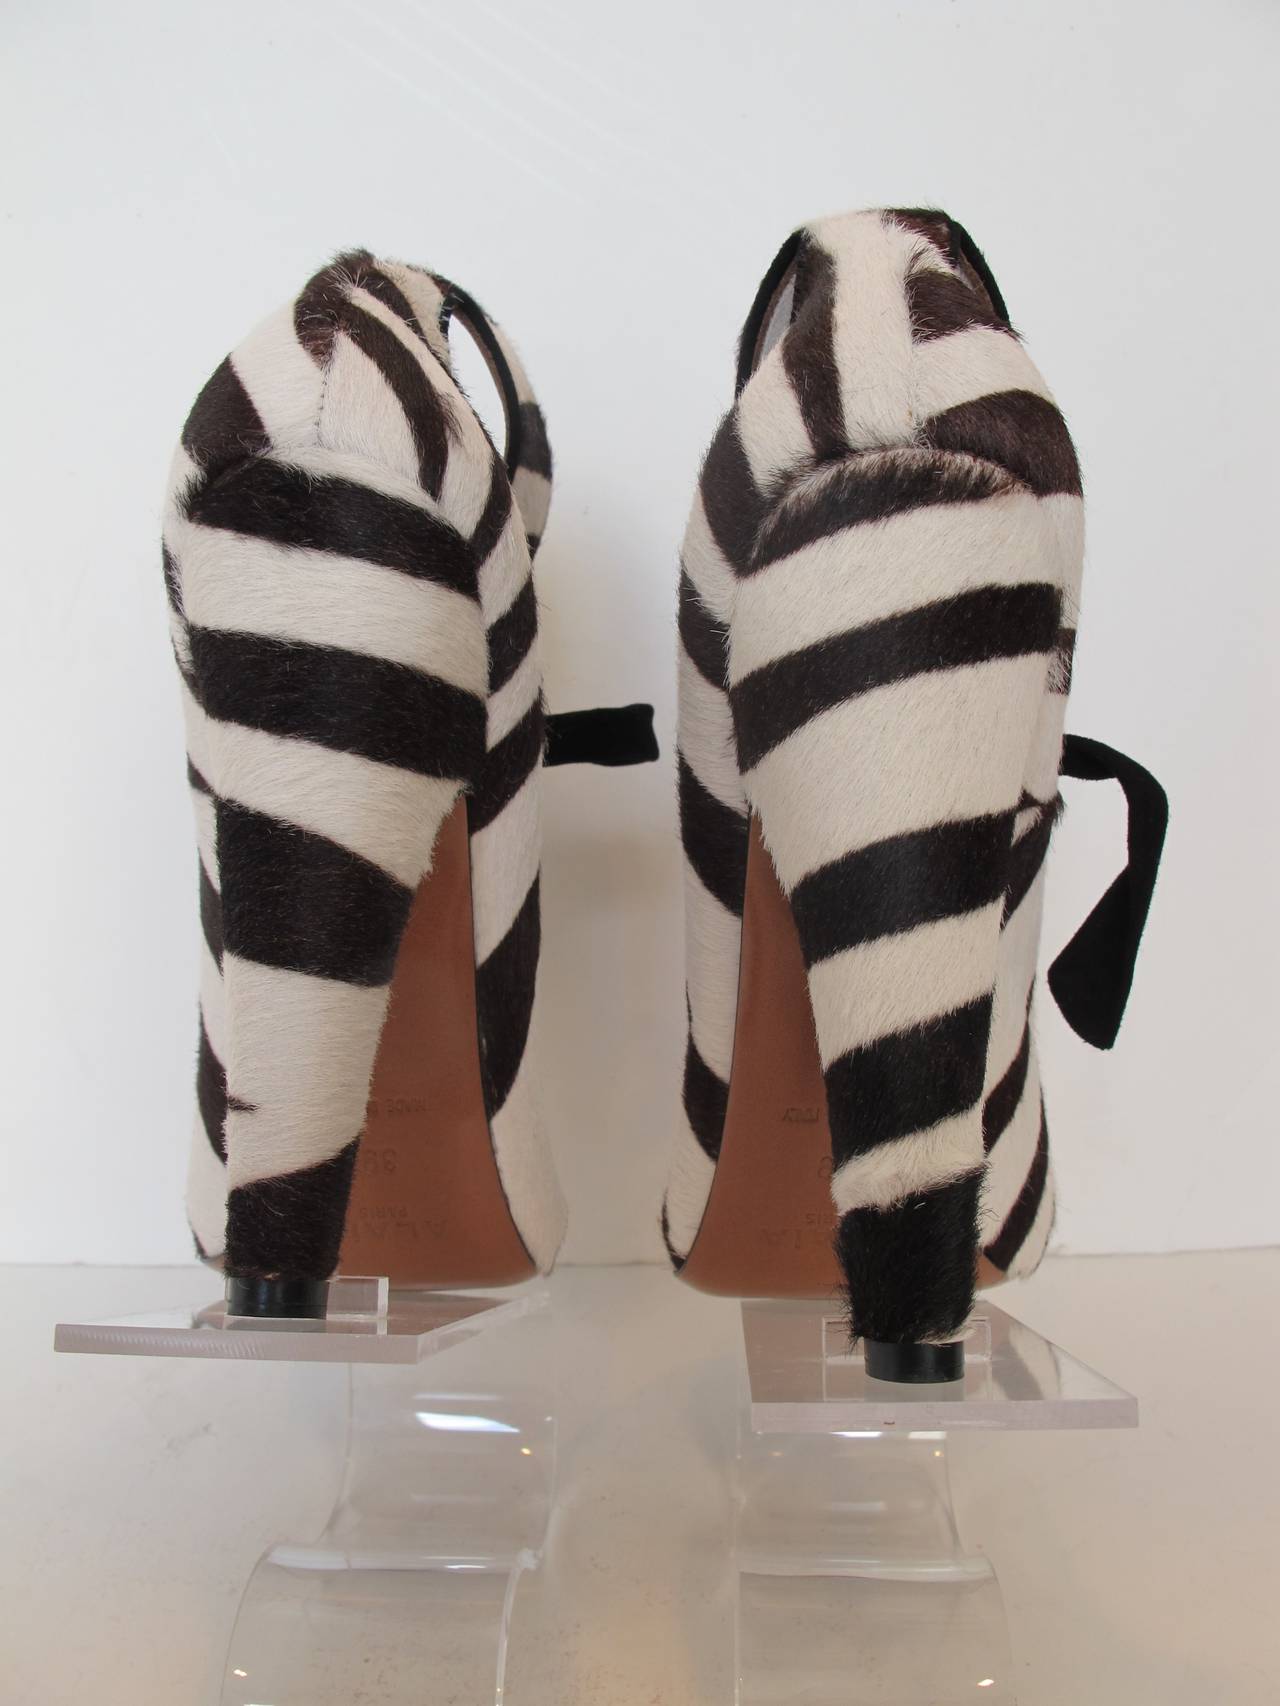 Alaia Black Zebra Shoes with Black Stripes In New Condition For Sale In San Francisco, CA